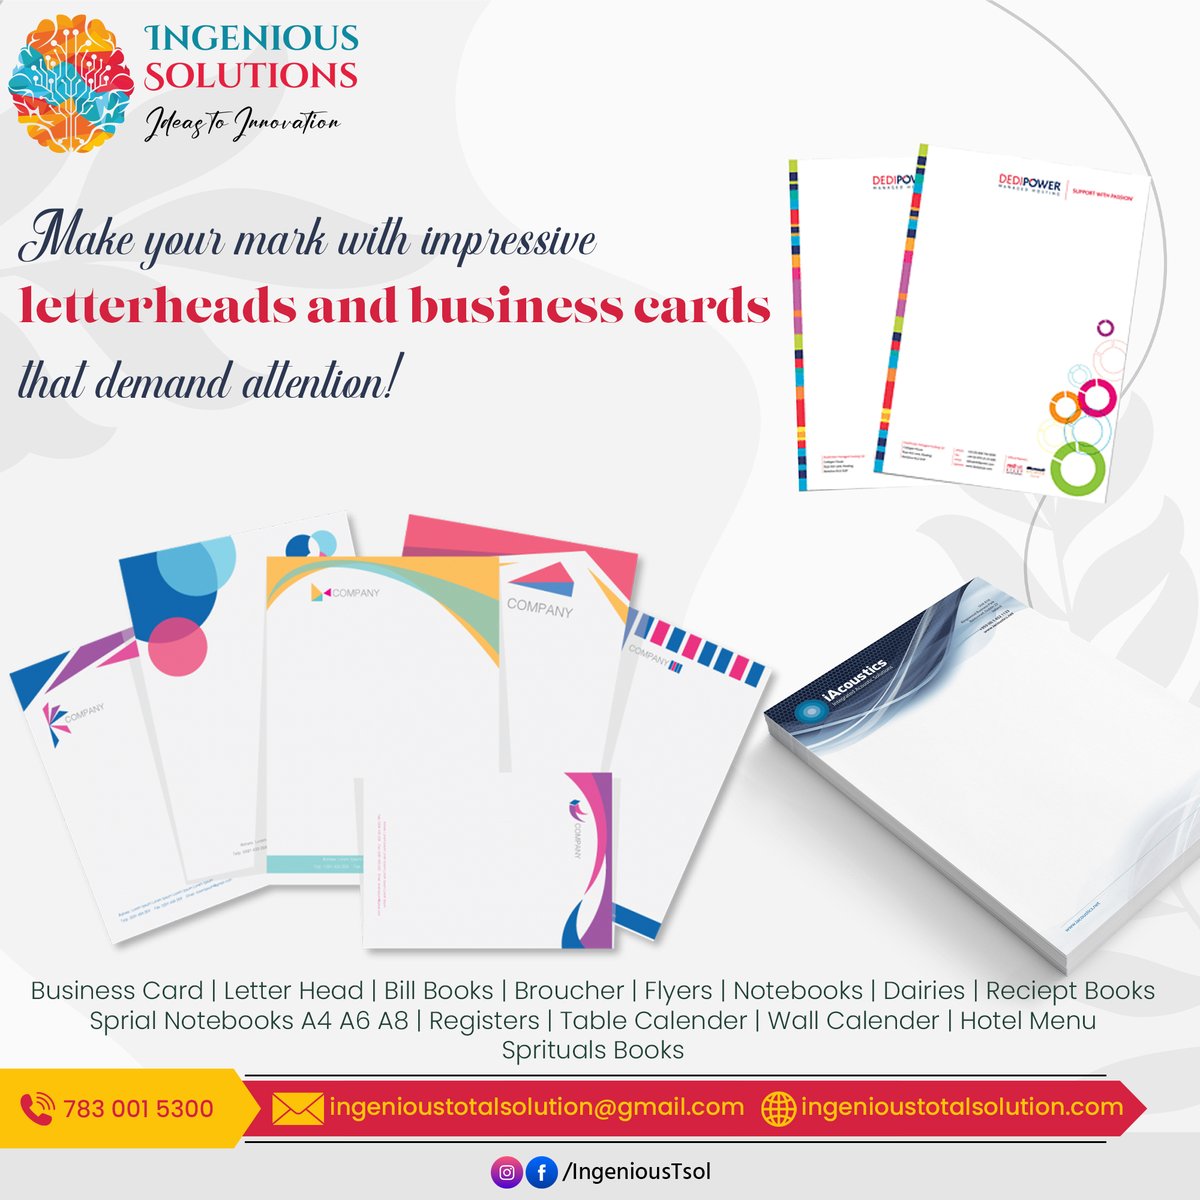 Make your mark with impressive letterheads
and business cards that demand attention! 🎯 Stand
out from the crowd with our top-notch prints. 📇✨

Order Now!
#CustomizedPaperBags #BrandElevation
#SustainablePackaging #PrintedWithLove #GoGreen
#ShopInStyle #ingenioustotalsolution